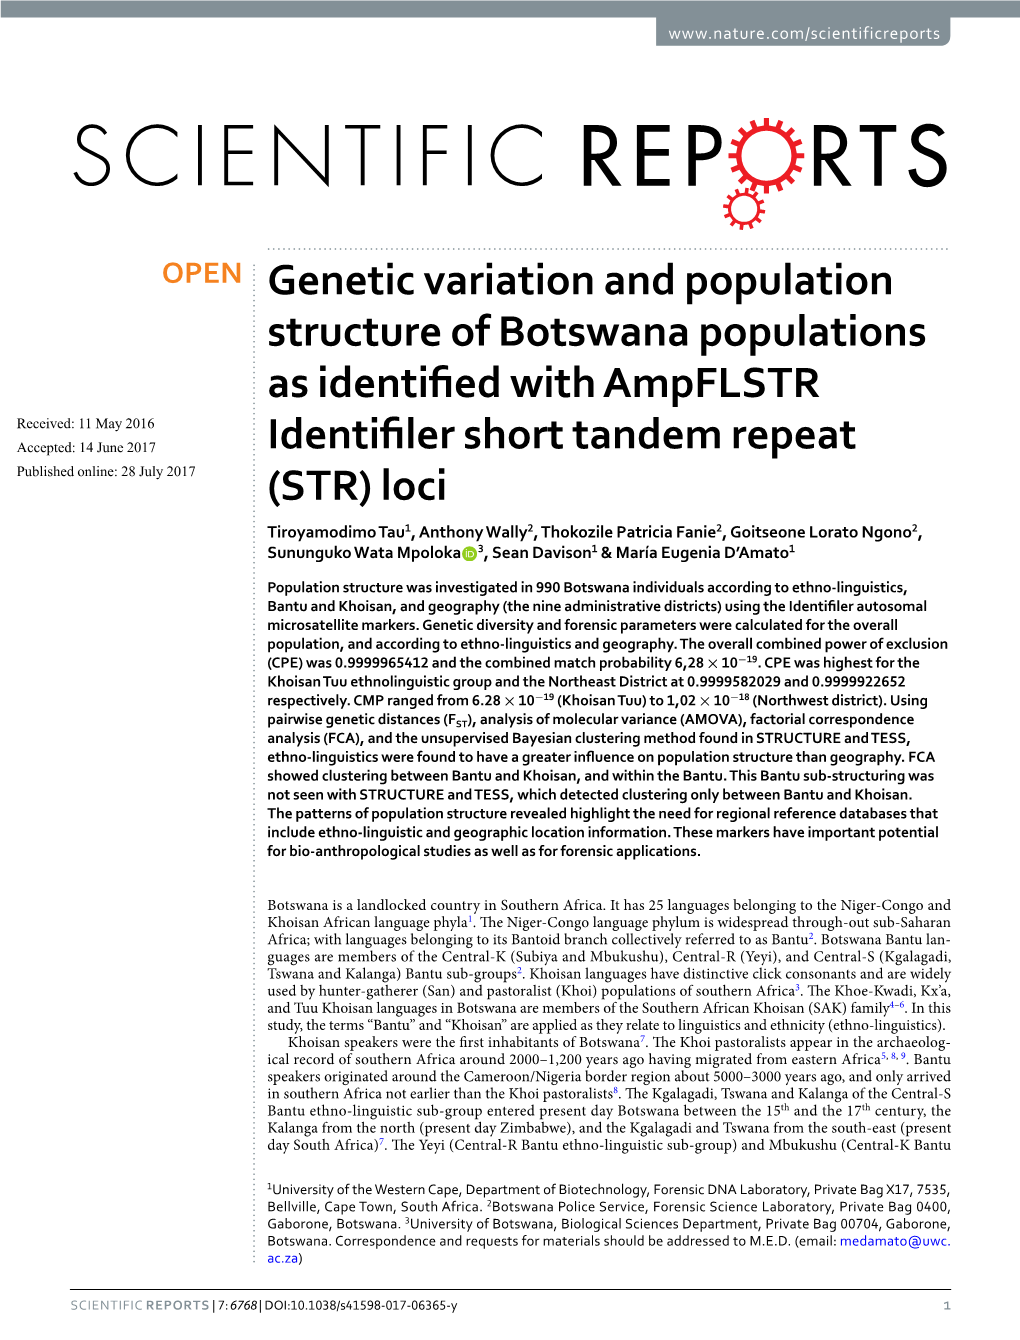 Genetic Variation and Population Structure of Botswana